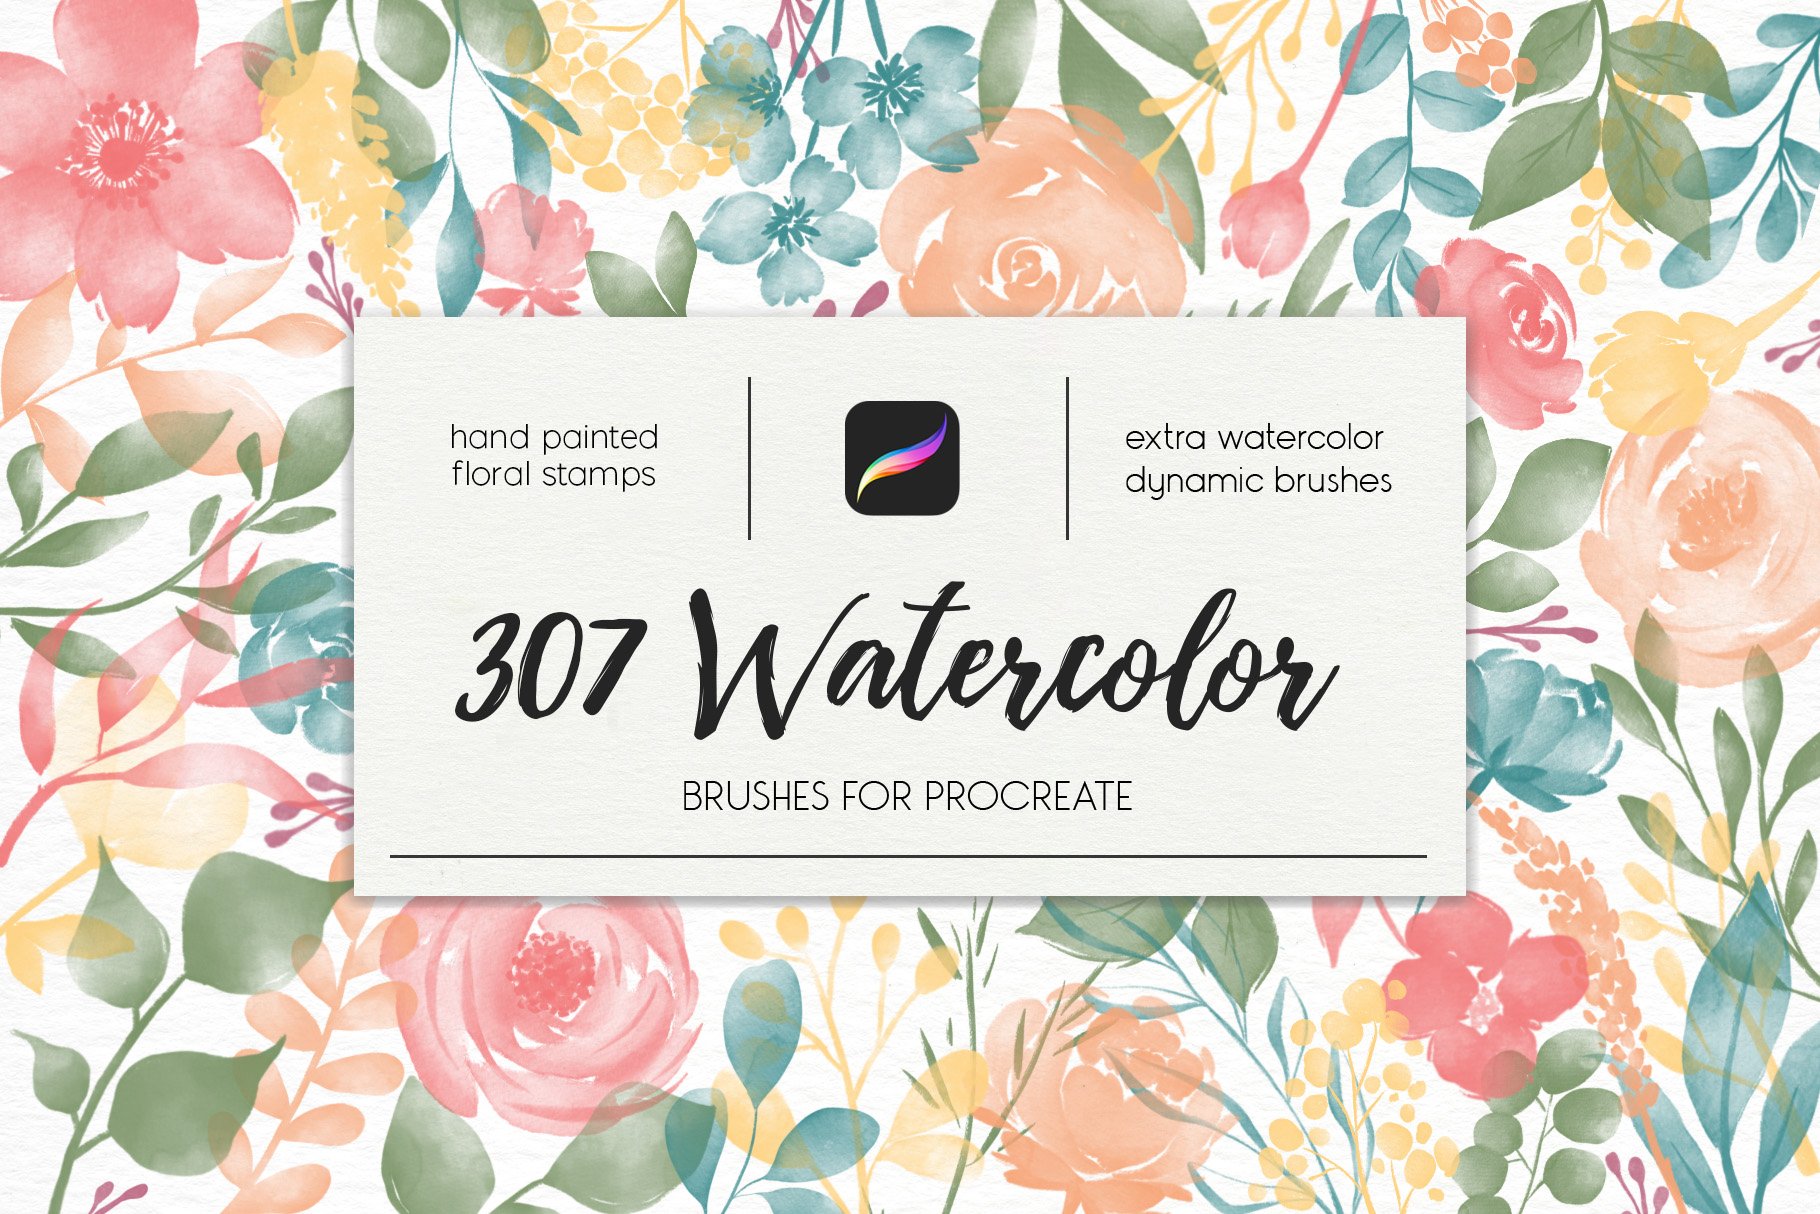 307 Watercolor Brushes For Procreate